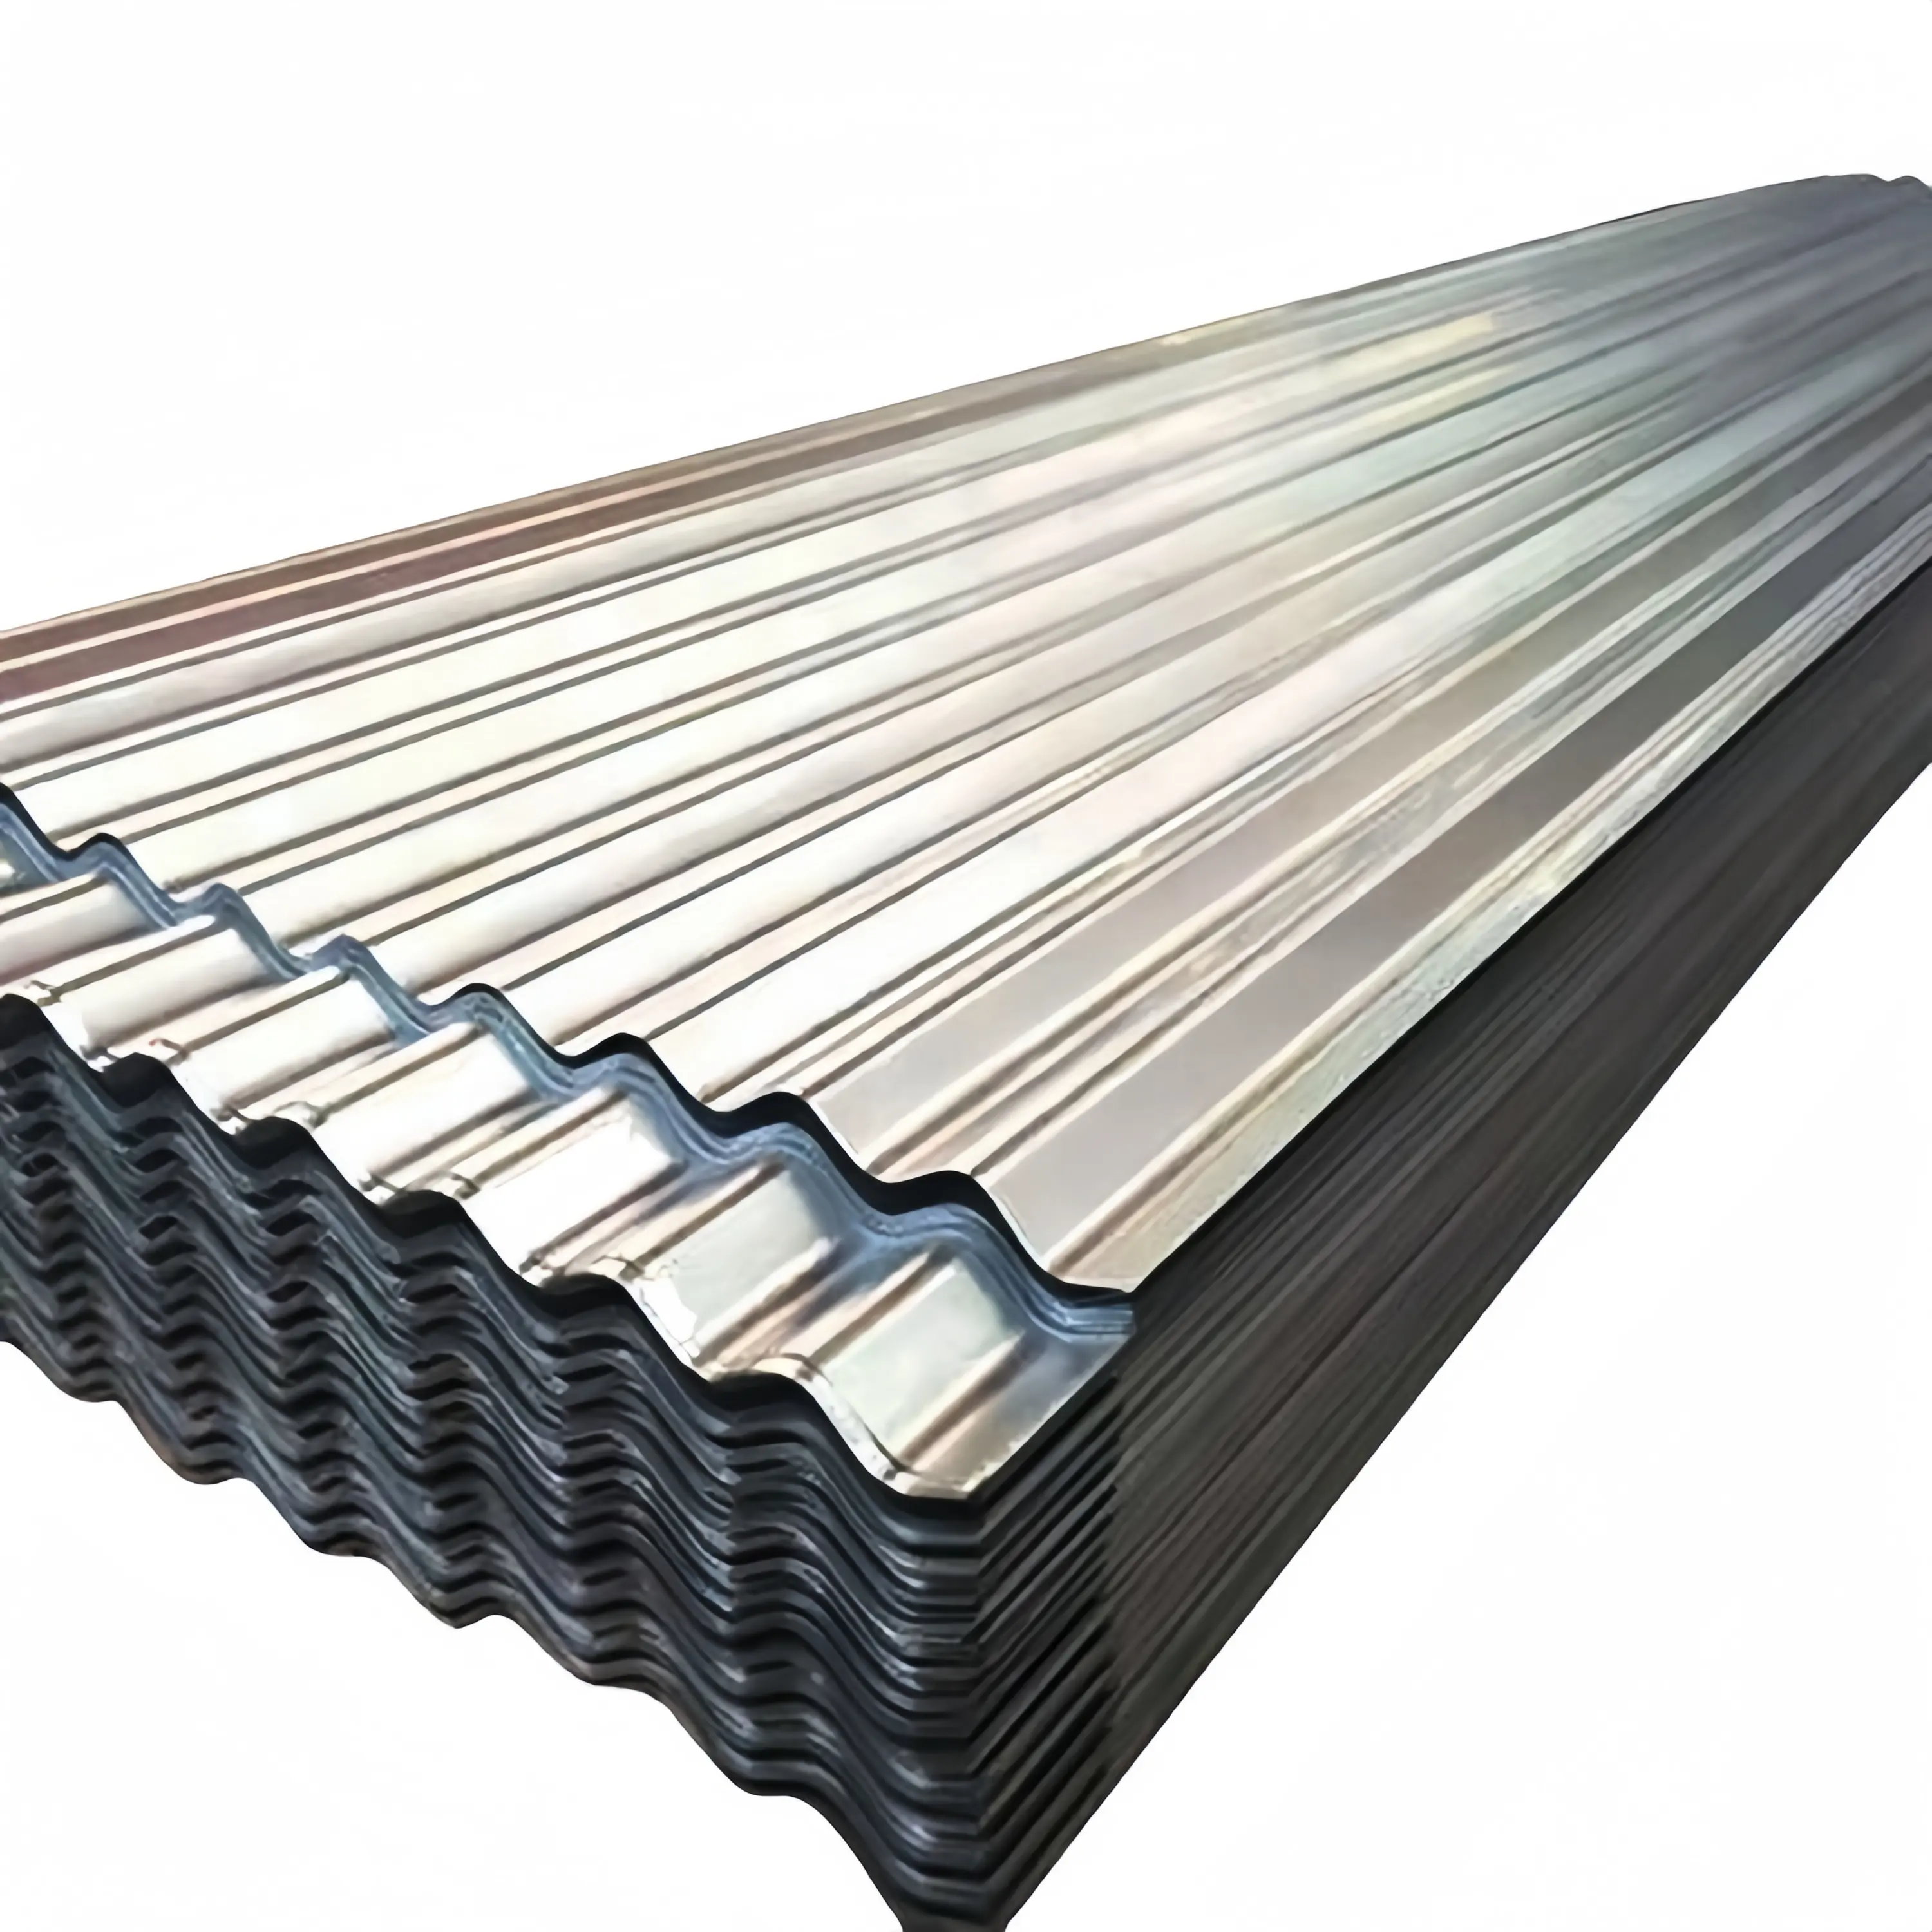 High quality galvanised metal roofing sheets GI Corrugated zinc iron roofing sheets BIS certified